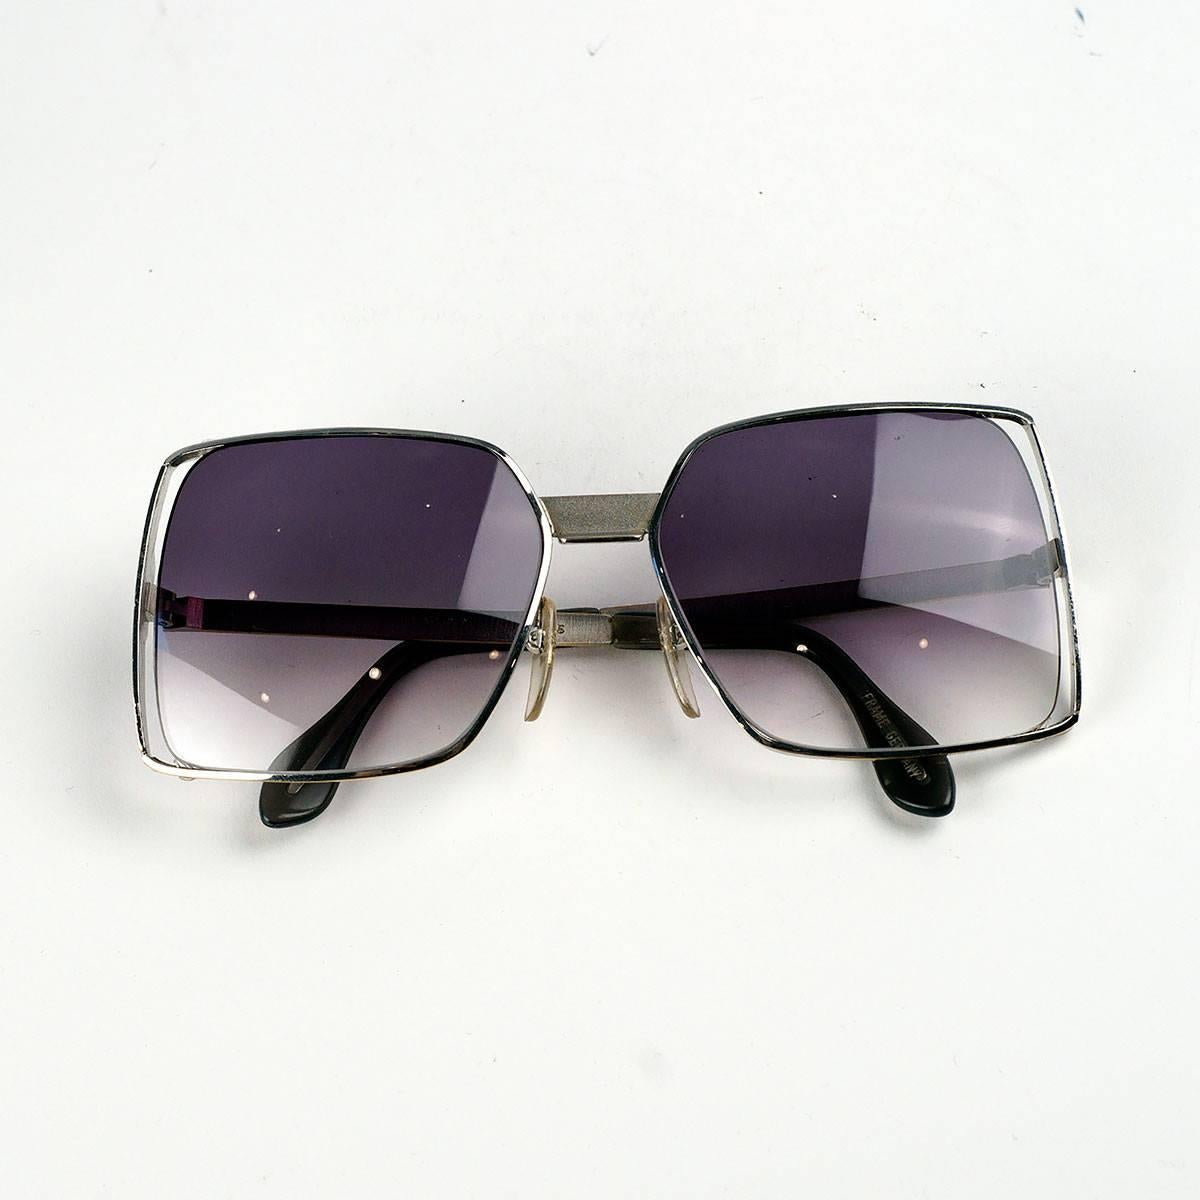 Silver Neostyle square frame sunglasses. 

Made In Germany. 135 BOUTIQUE 380 54 16.

Measurements:
Lens- 2 inches wide, 2 inches high
Arm- 4.5 inches
Frame- 5 inches

Good Vintage Condition:Please remember all clothes are previously owned and gently